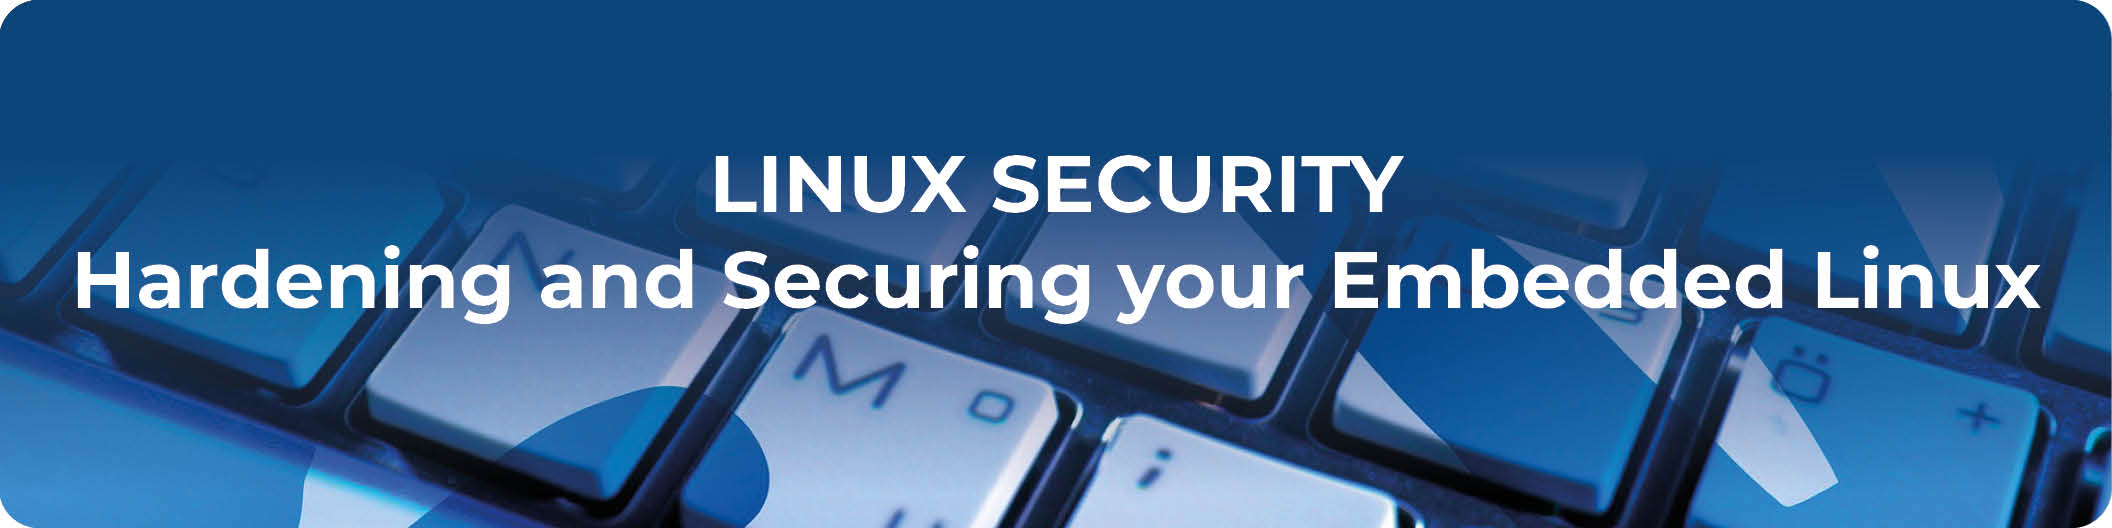 LINUX SECURITY - Hardening and Securing your Embedded Linux